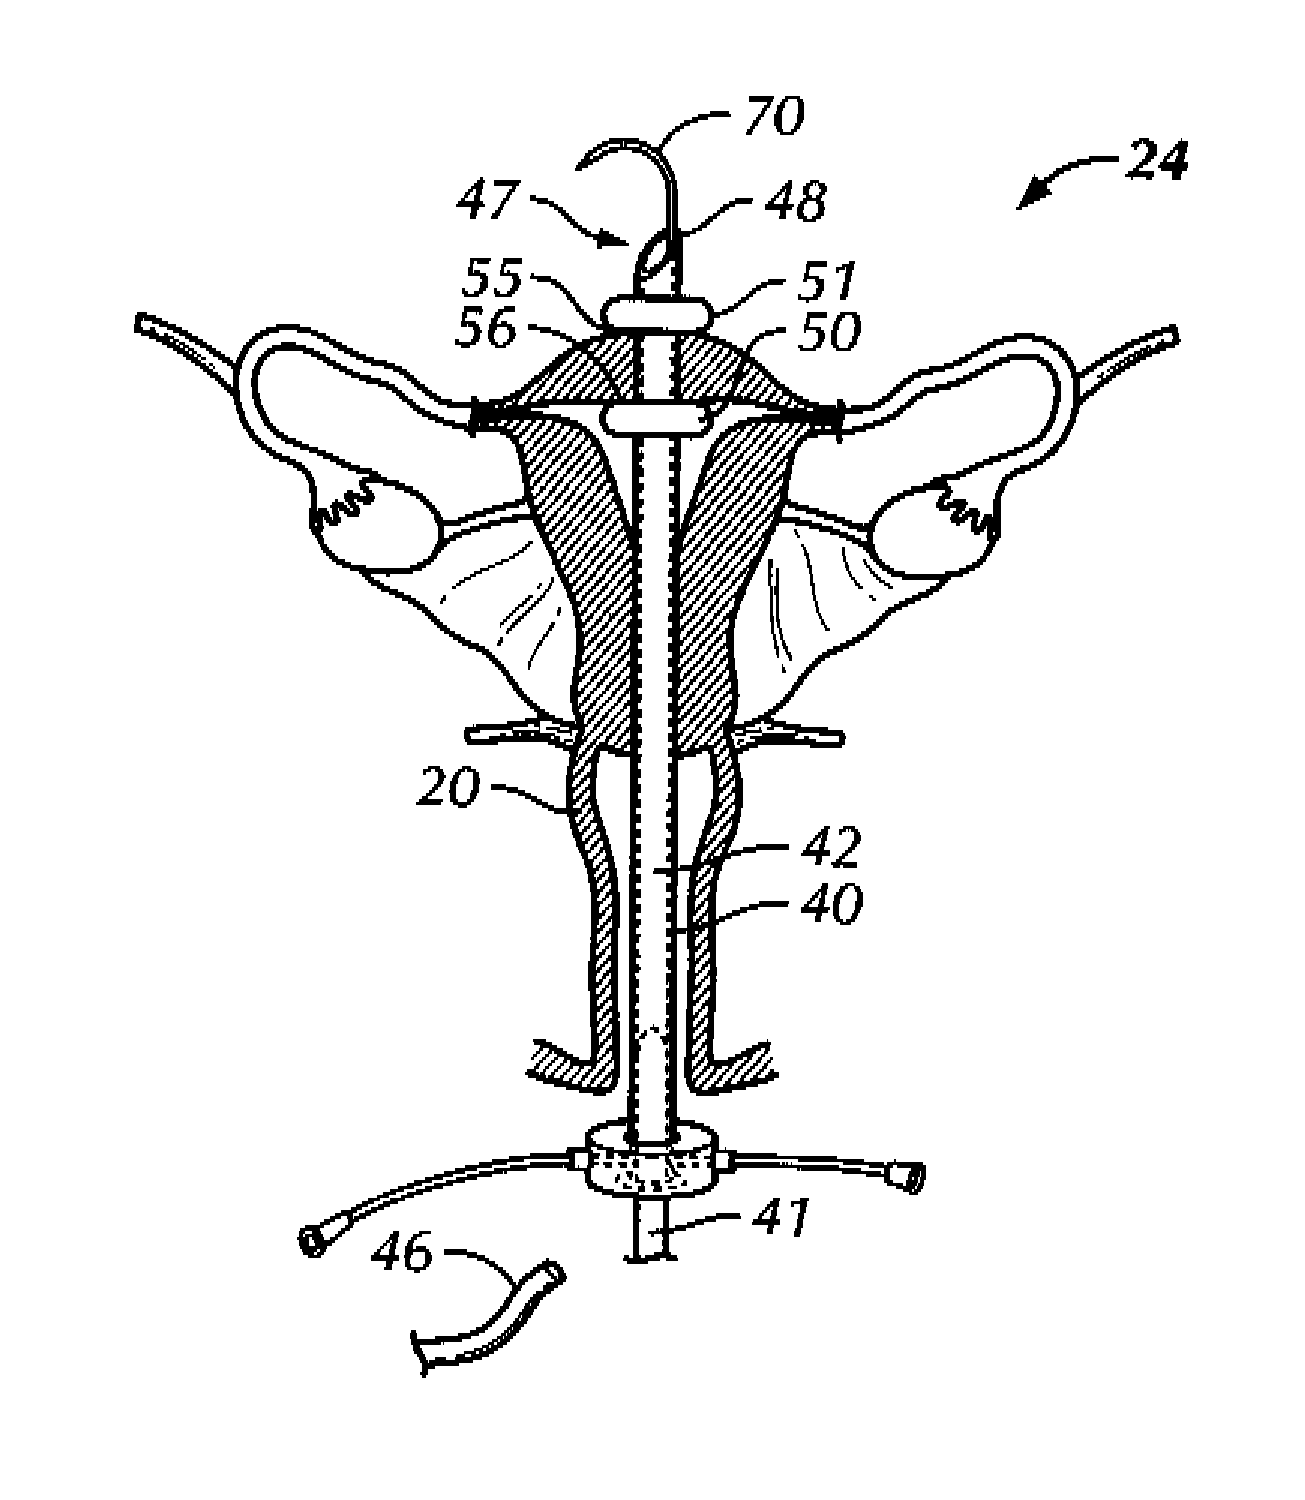 Methods and apparatus for natural orifice vaginal hysterectomy